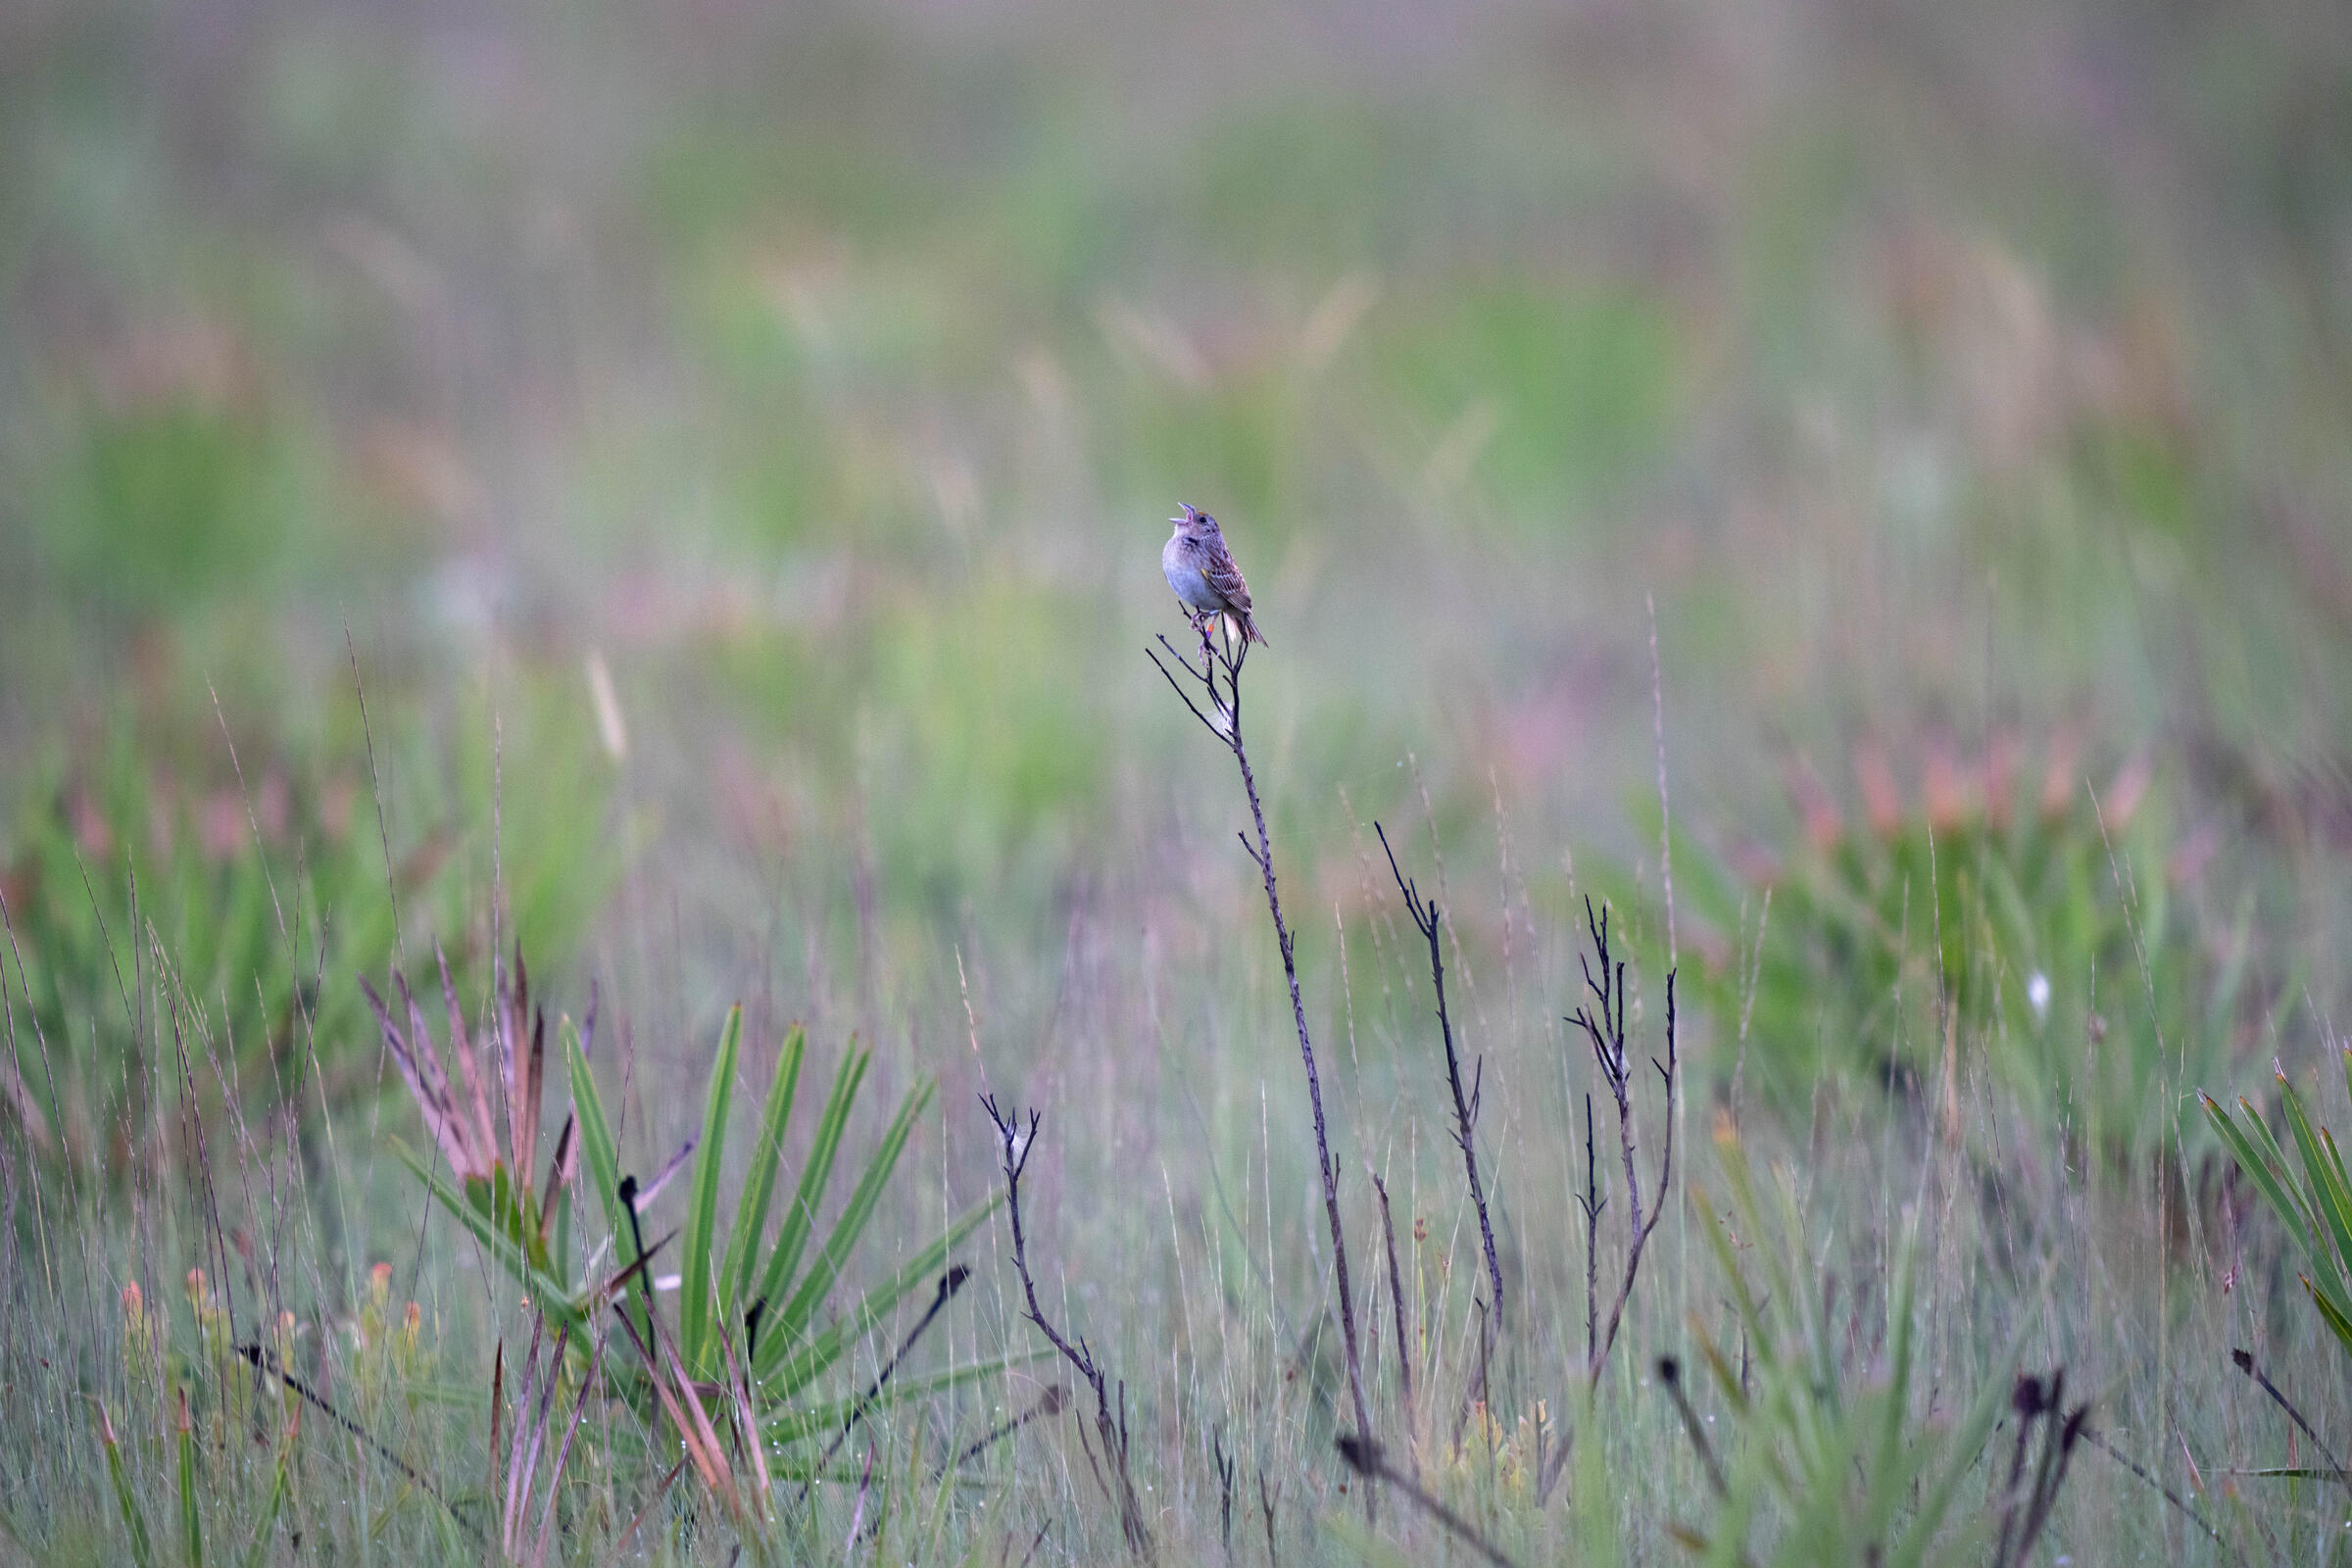 Florida Grasshopper Sparrow perched on a stick in the middle of a meadow, singing. Photo by Carlton Ward.